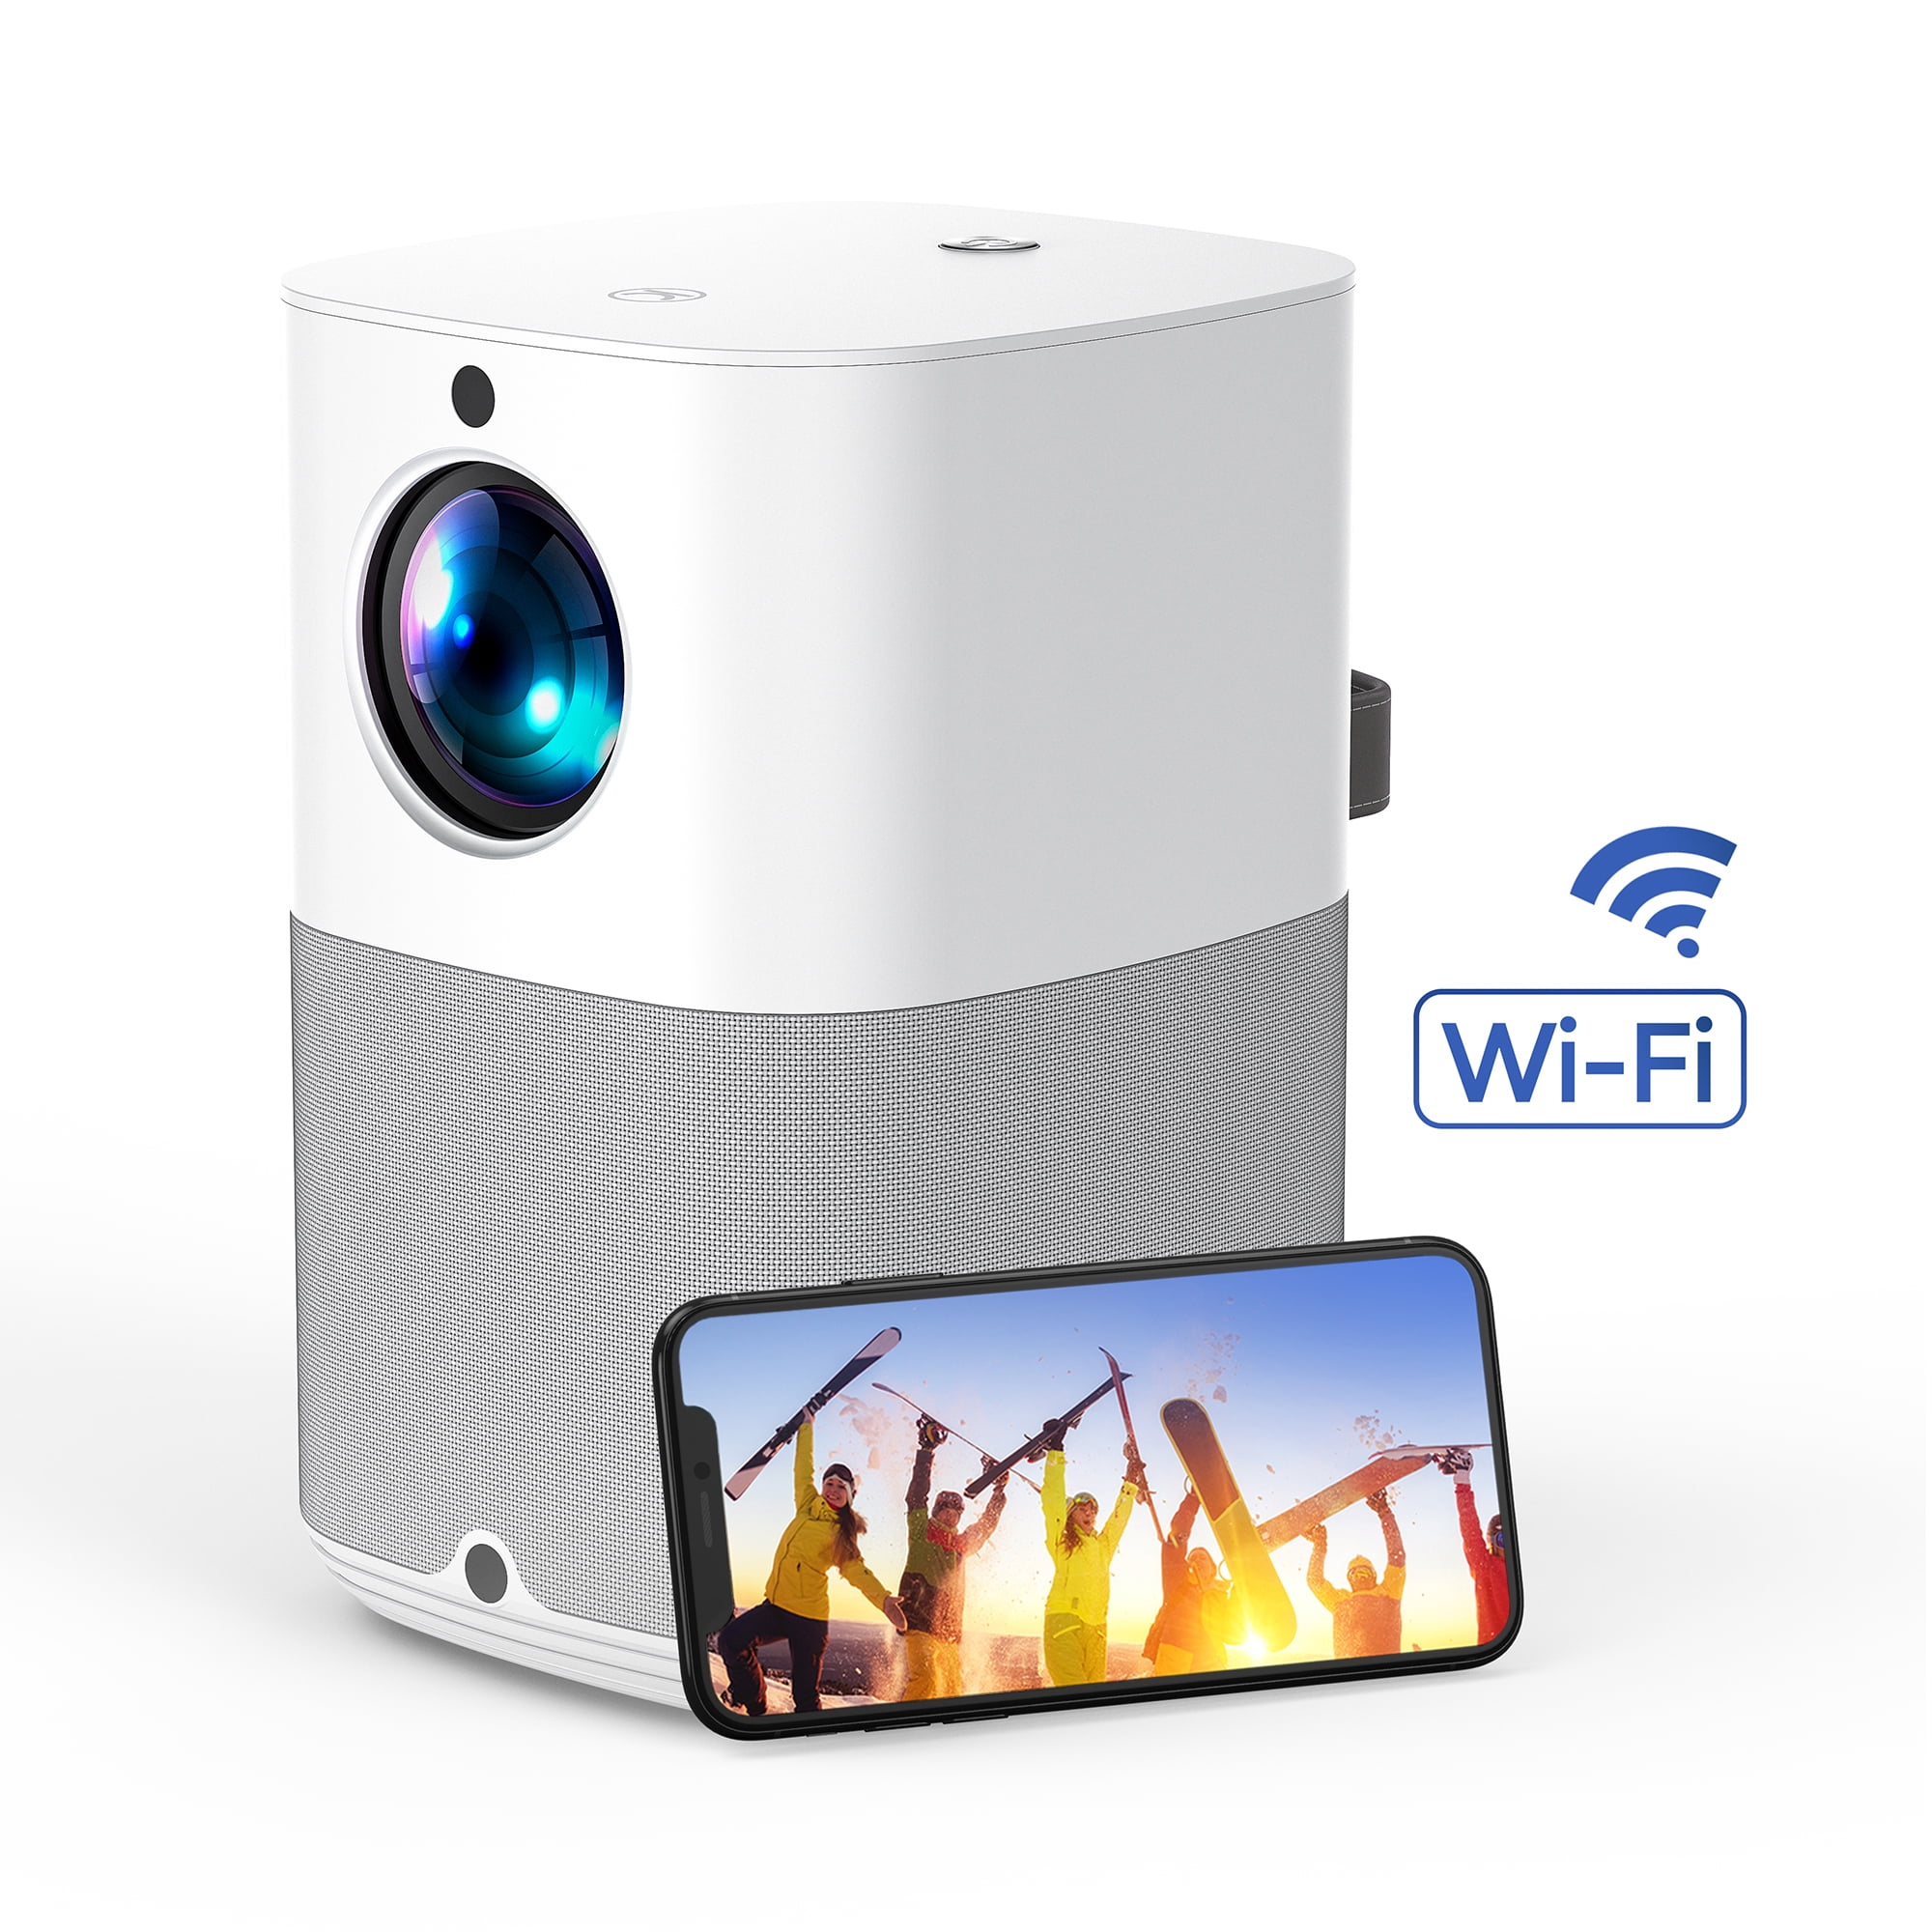 VANKYO Performance V700W 5G WiFi Bluetooth Projector, Native 1080P Video  Projector with 224 Projection Size, Full HD 4K Supported Movie Projector,  Compatible with TV Stick, HDMI, USB, iOS & Android 